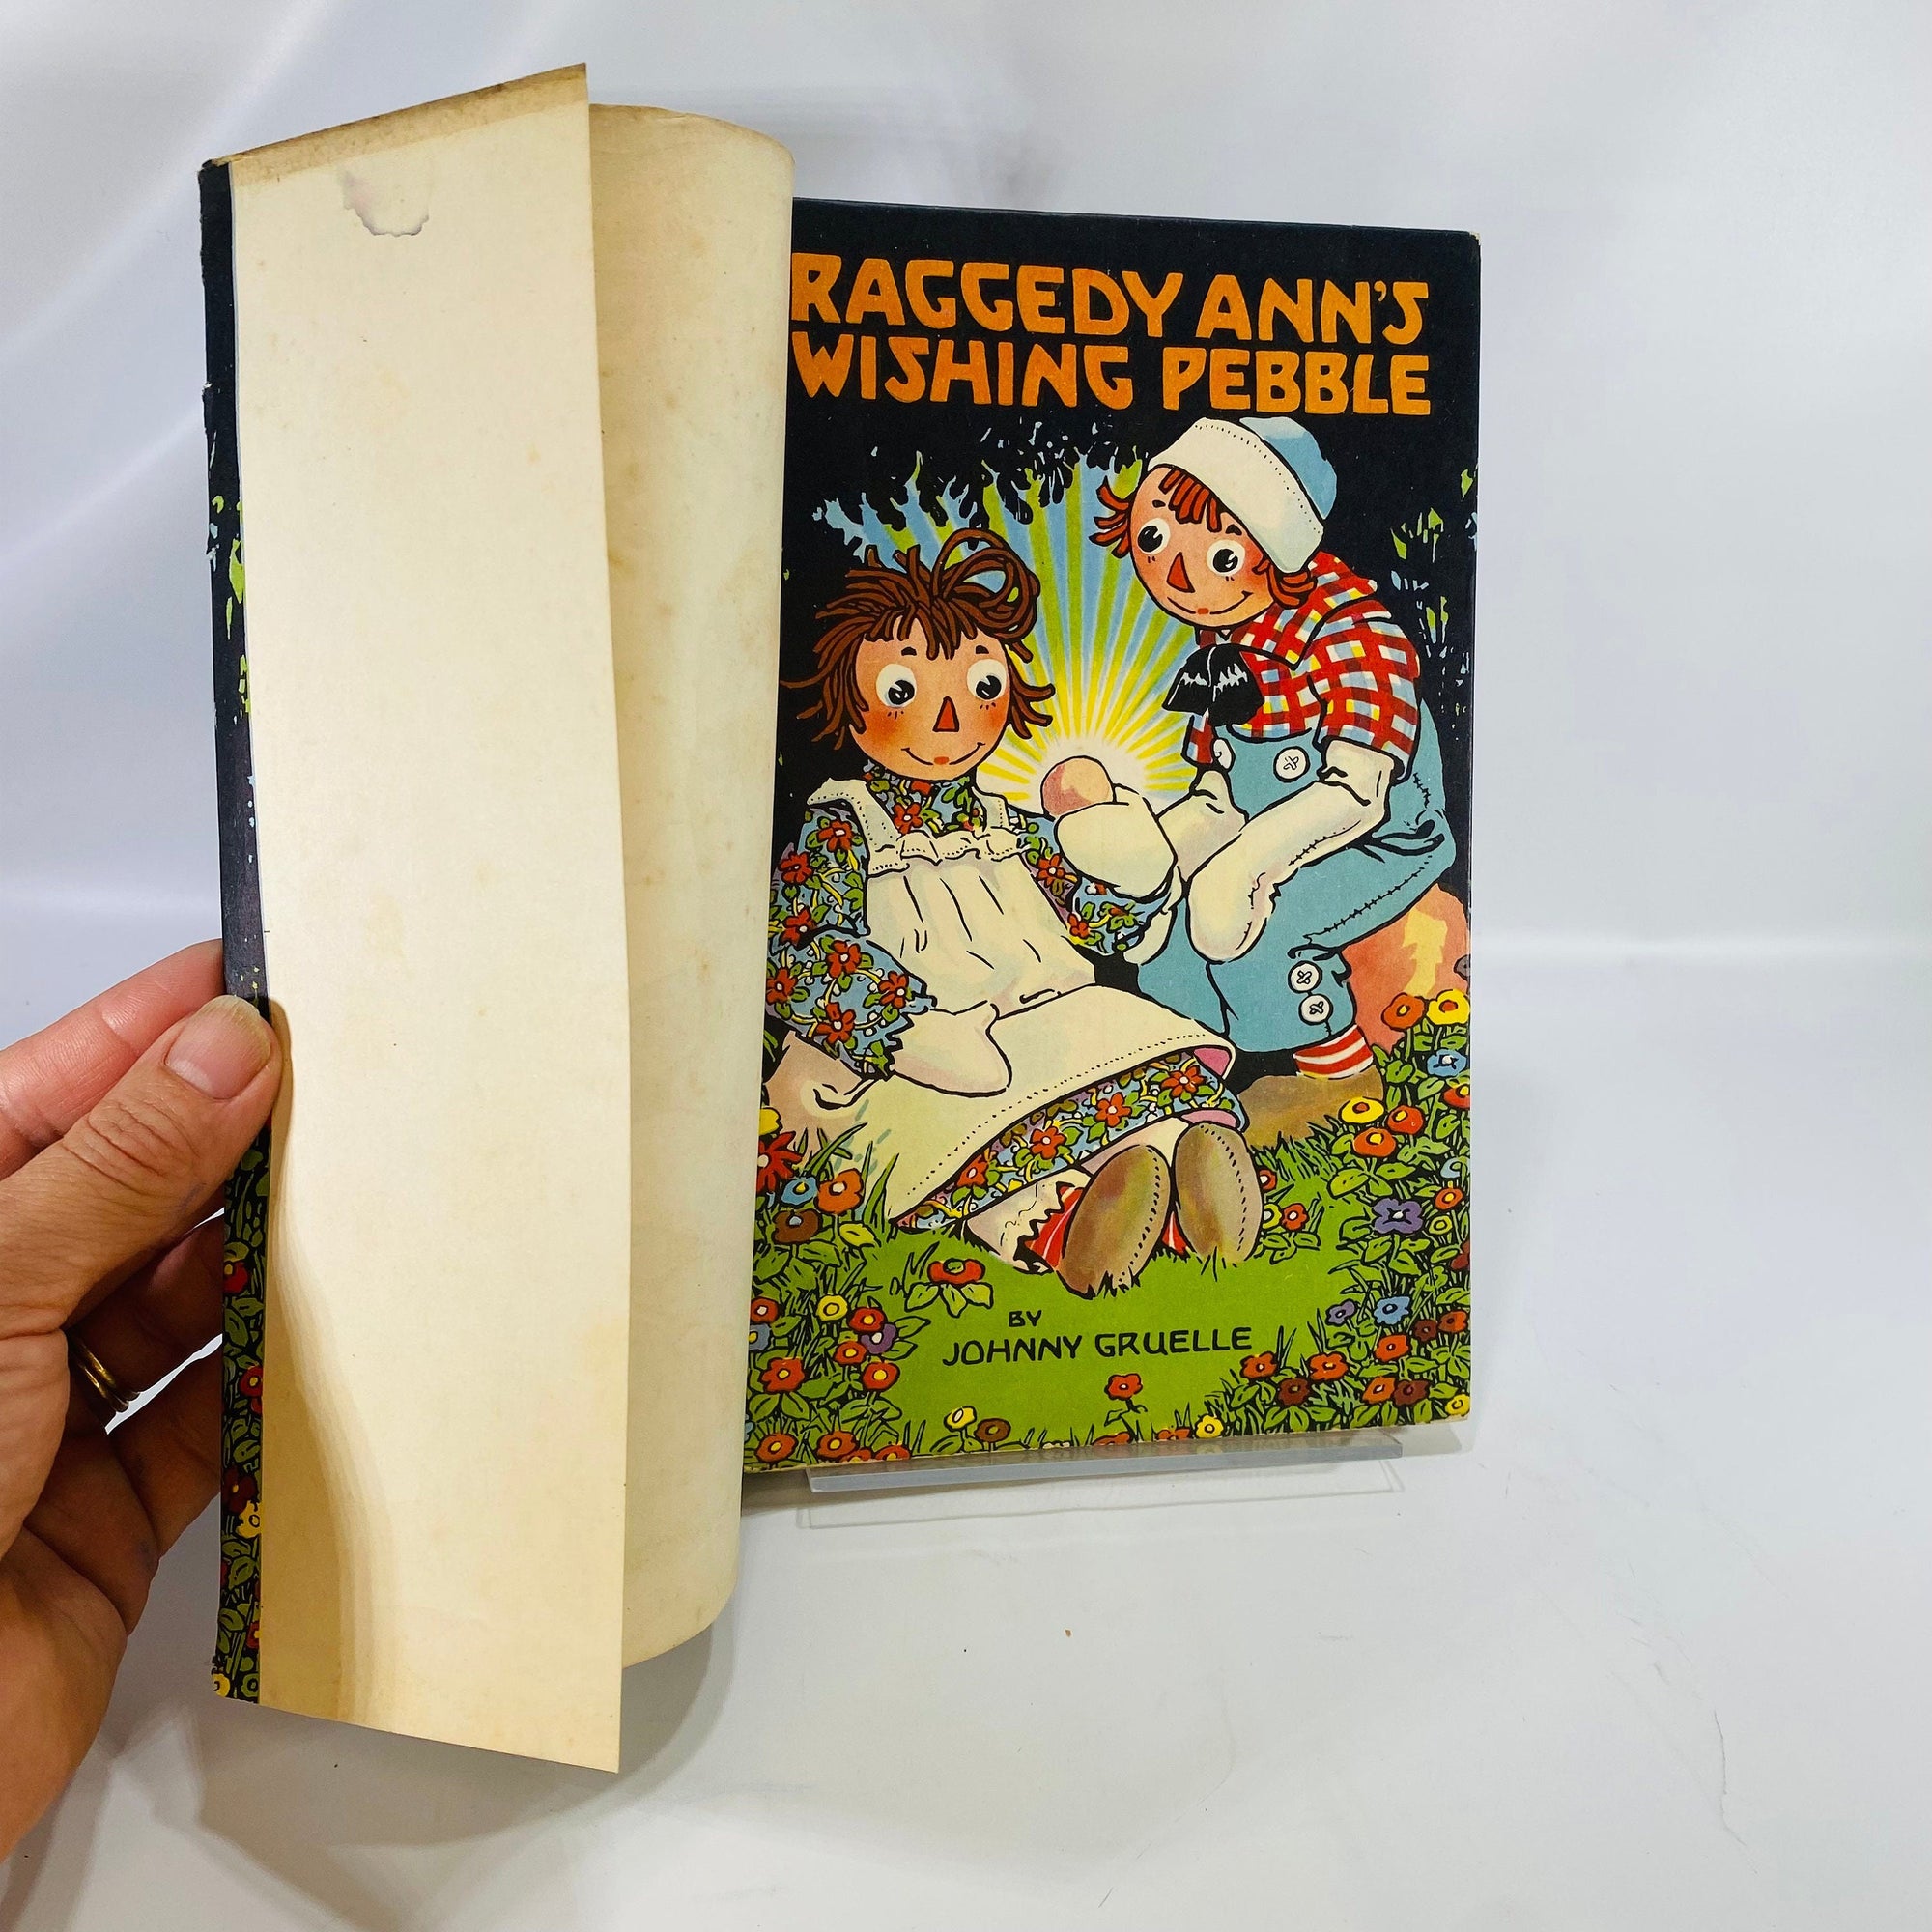 Raggedy Ann's Wishing Pebble by Johnny Gruelle 1925 M.A.Donohue & CompanyVintage Book